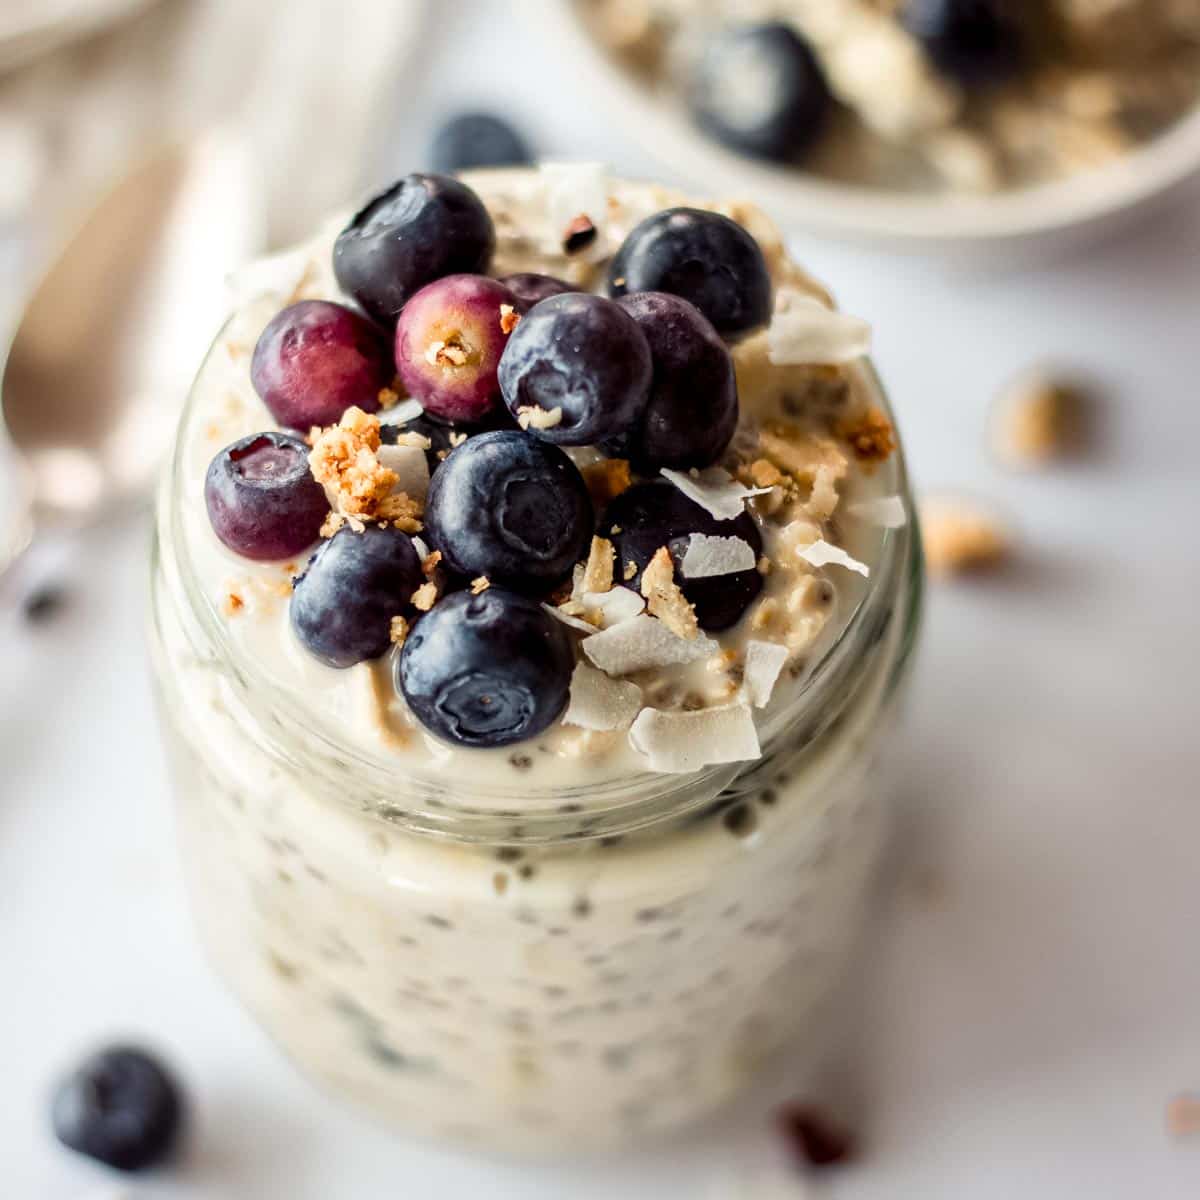 Glass jar of blueberry overnight oats decorated with blueberries and granola.